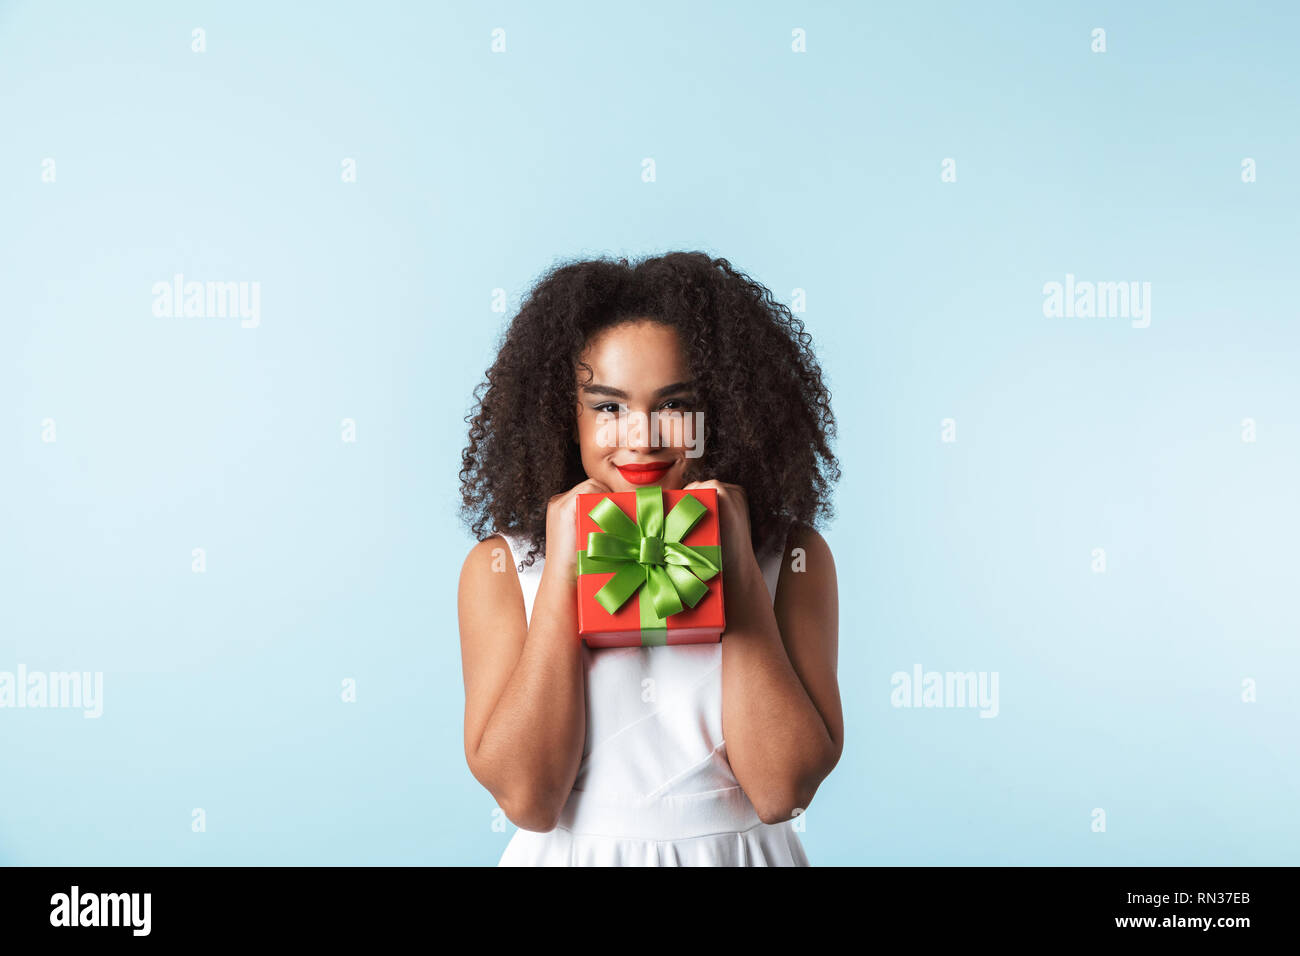 Cheerful young african woman wearing dress celebrating isolated, holding present box Stock Photo